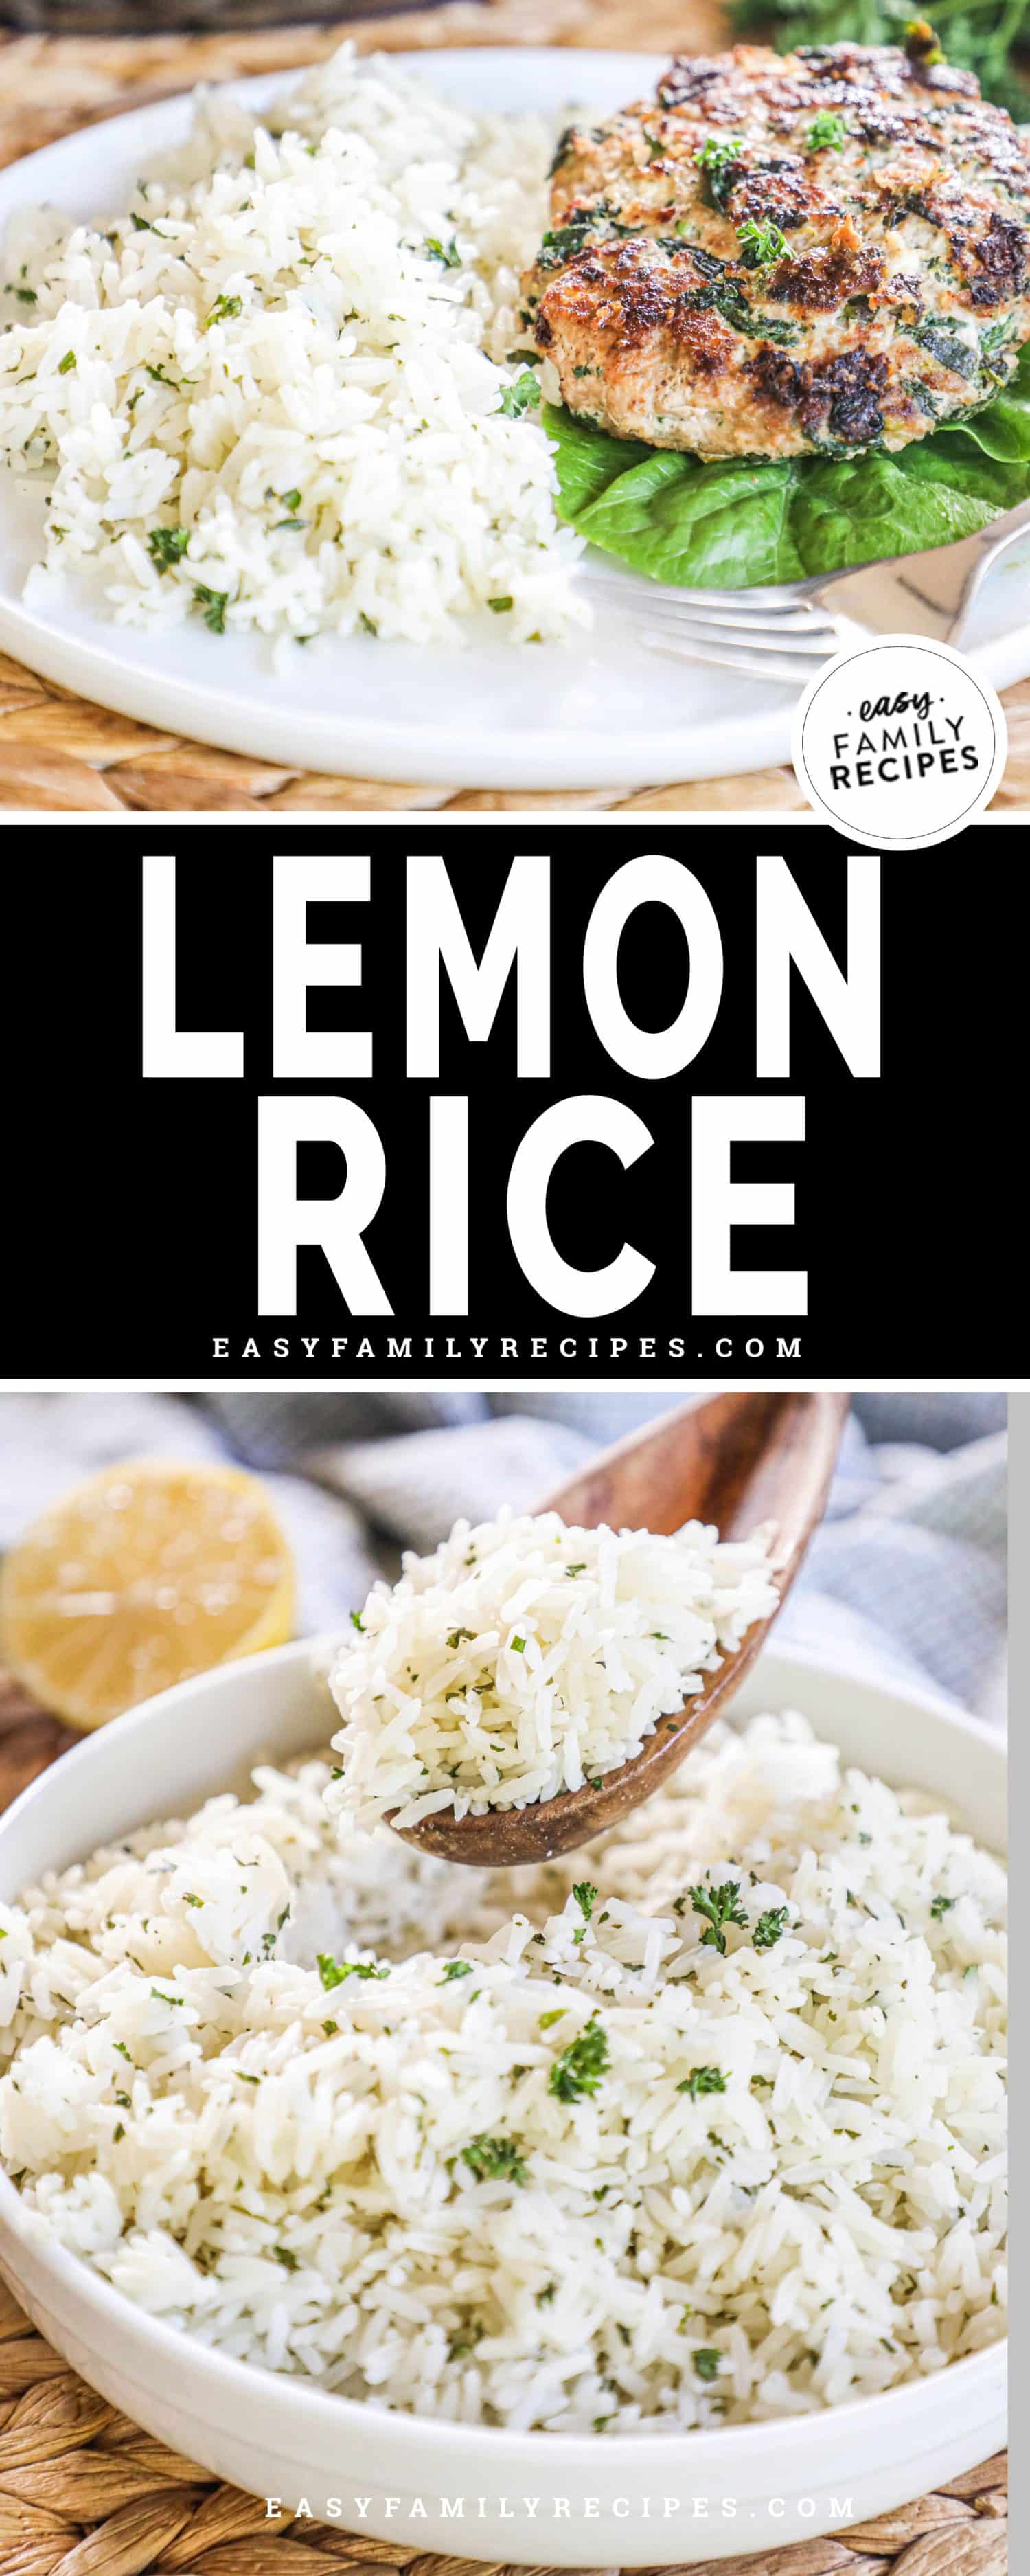 lemon herb rice on a white plate with grilled chicken and a white bowl filled with lemon rice.